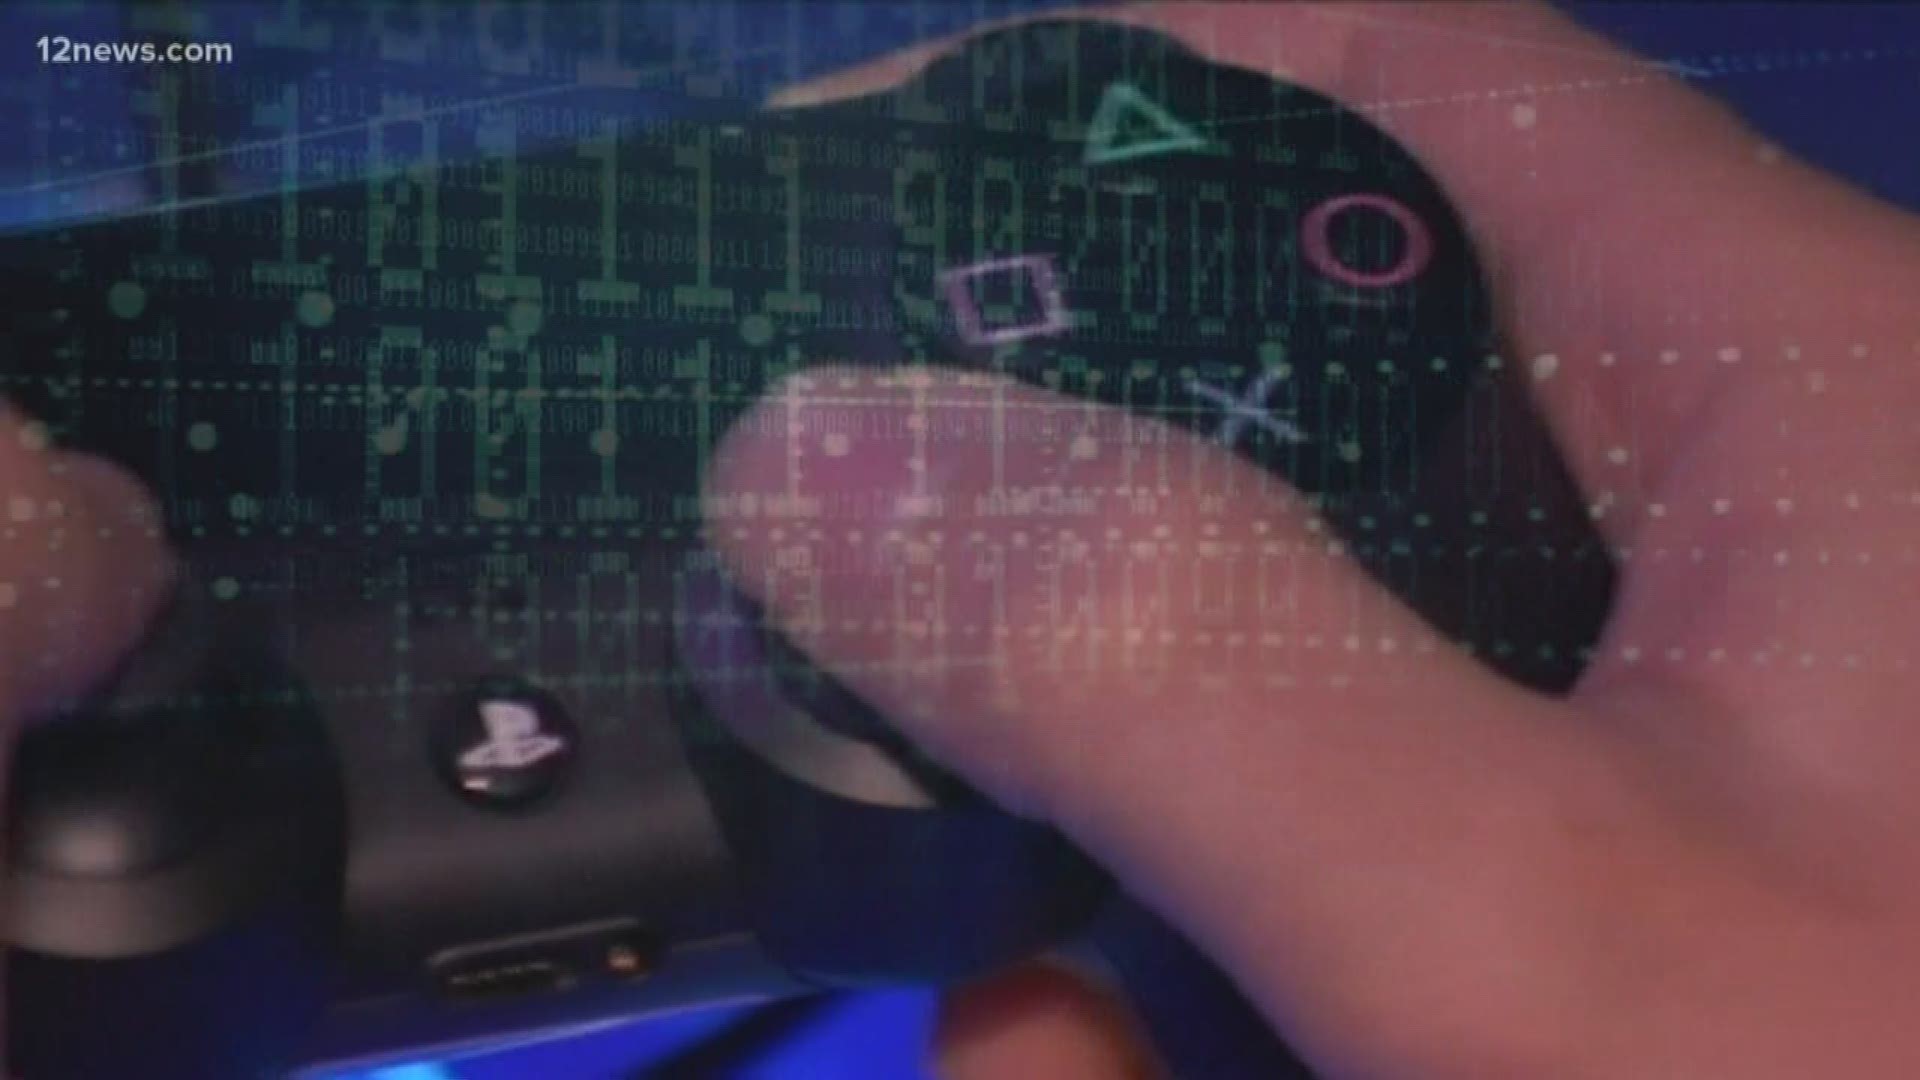 The 12 News I-Team looks into strategies one how to protect your children while playing multiplayer video games.